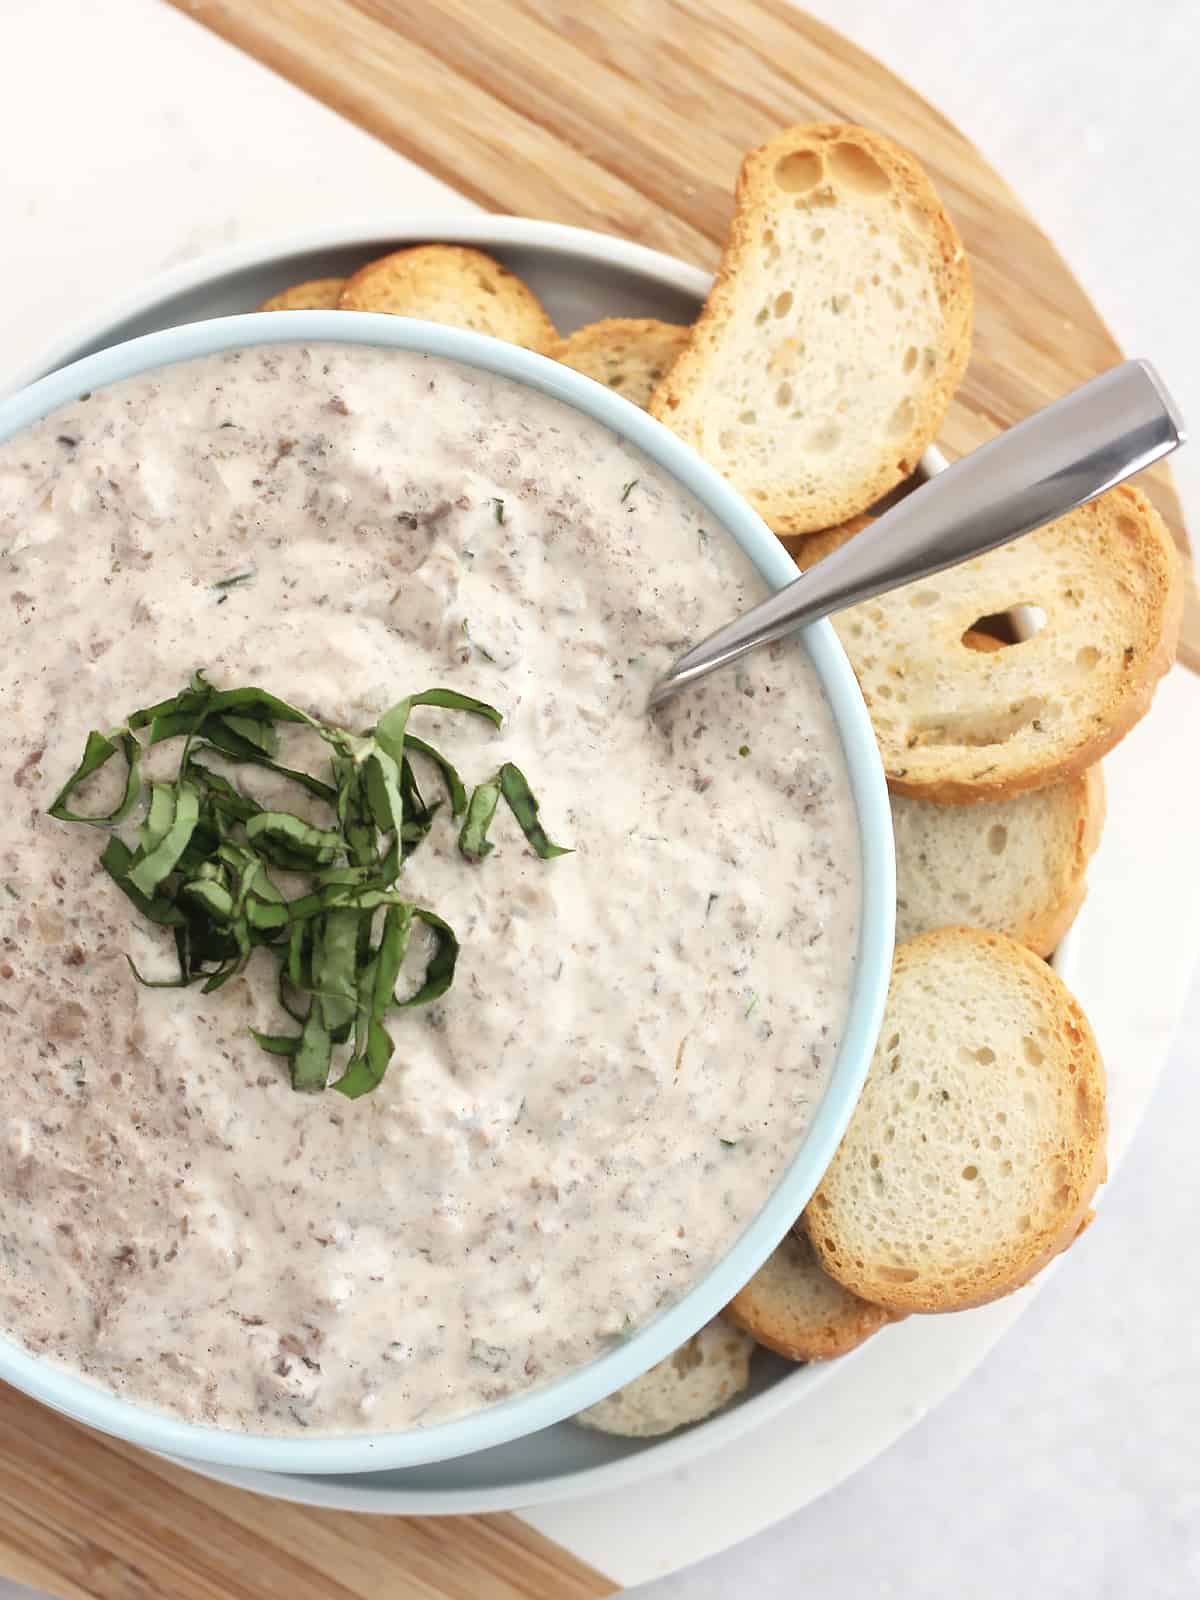 Mushroom dip served in a blue bowl with a spoon.